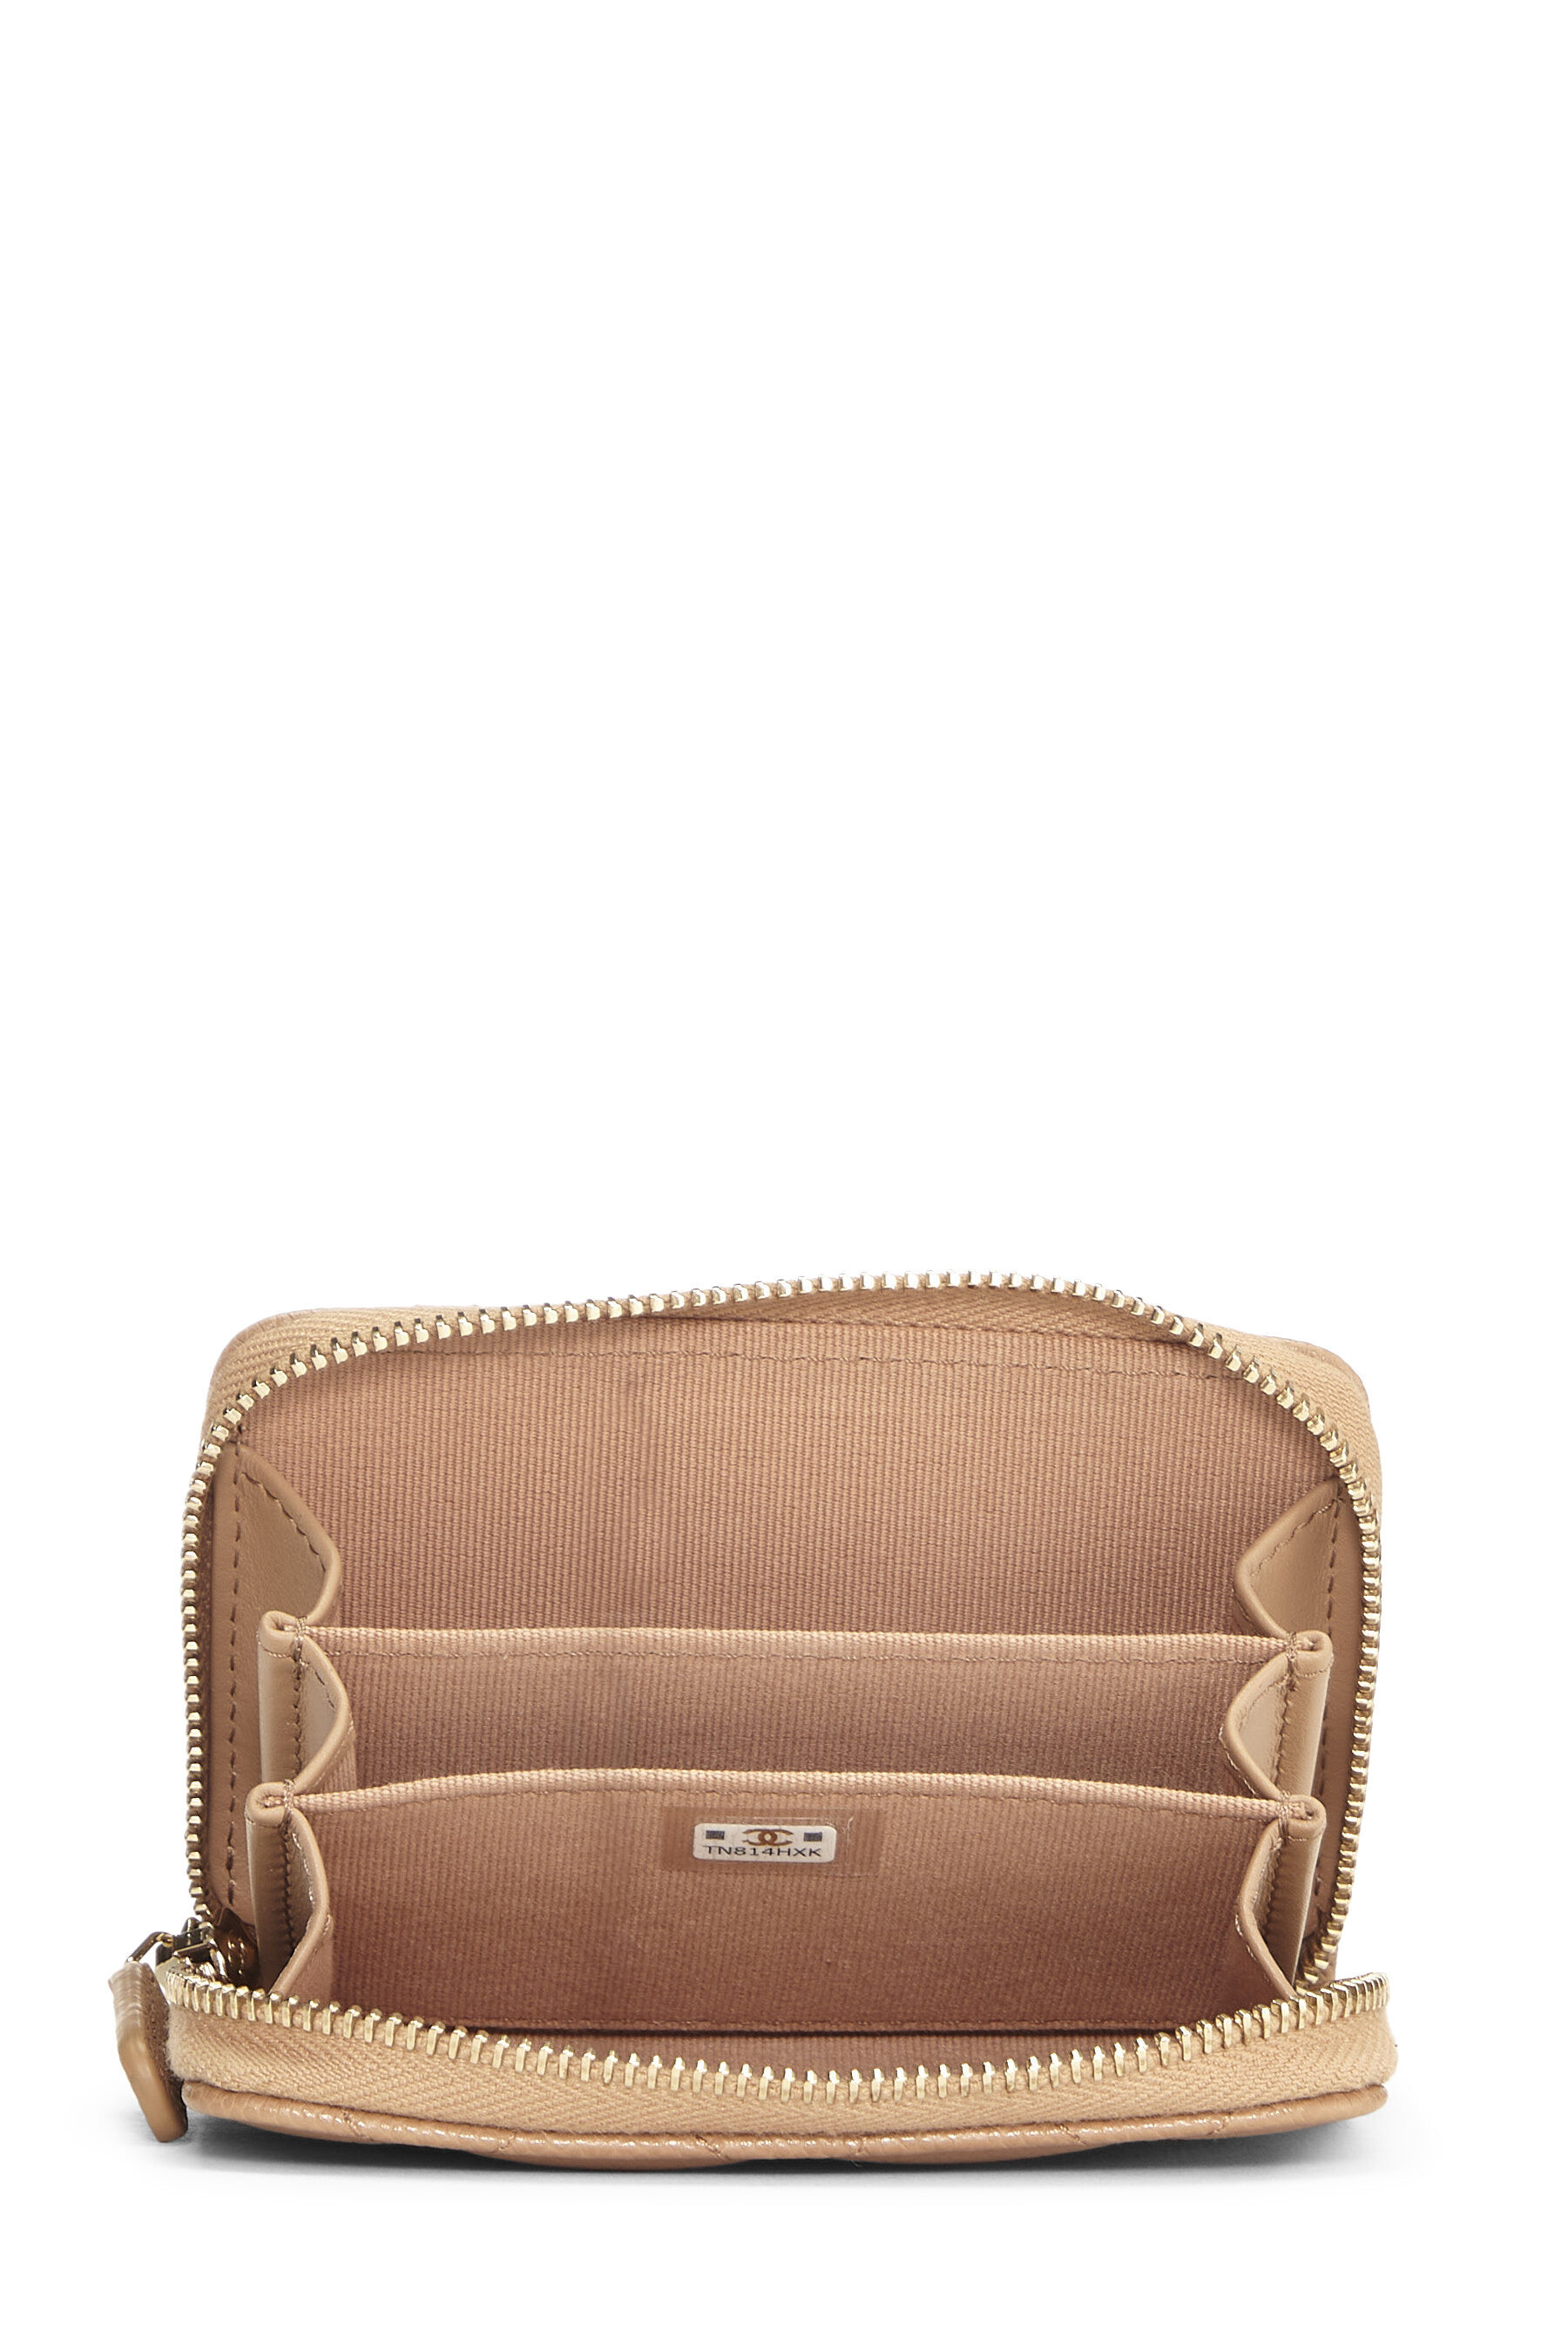 DKNY Bryant Zip-Around Wallet at Amazon Women's Clothing store